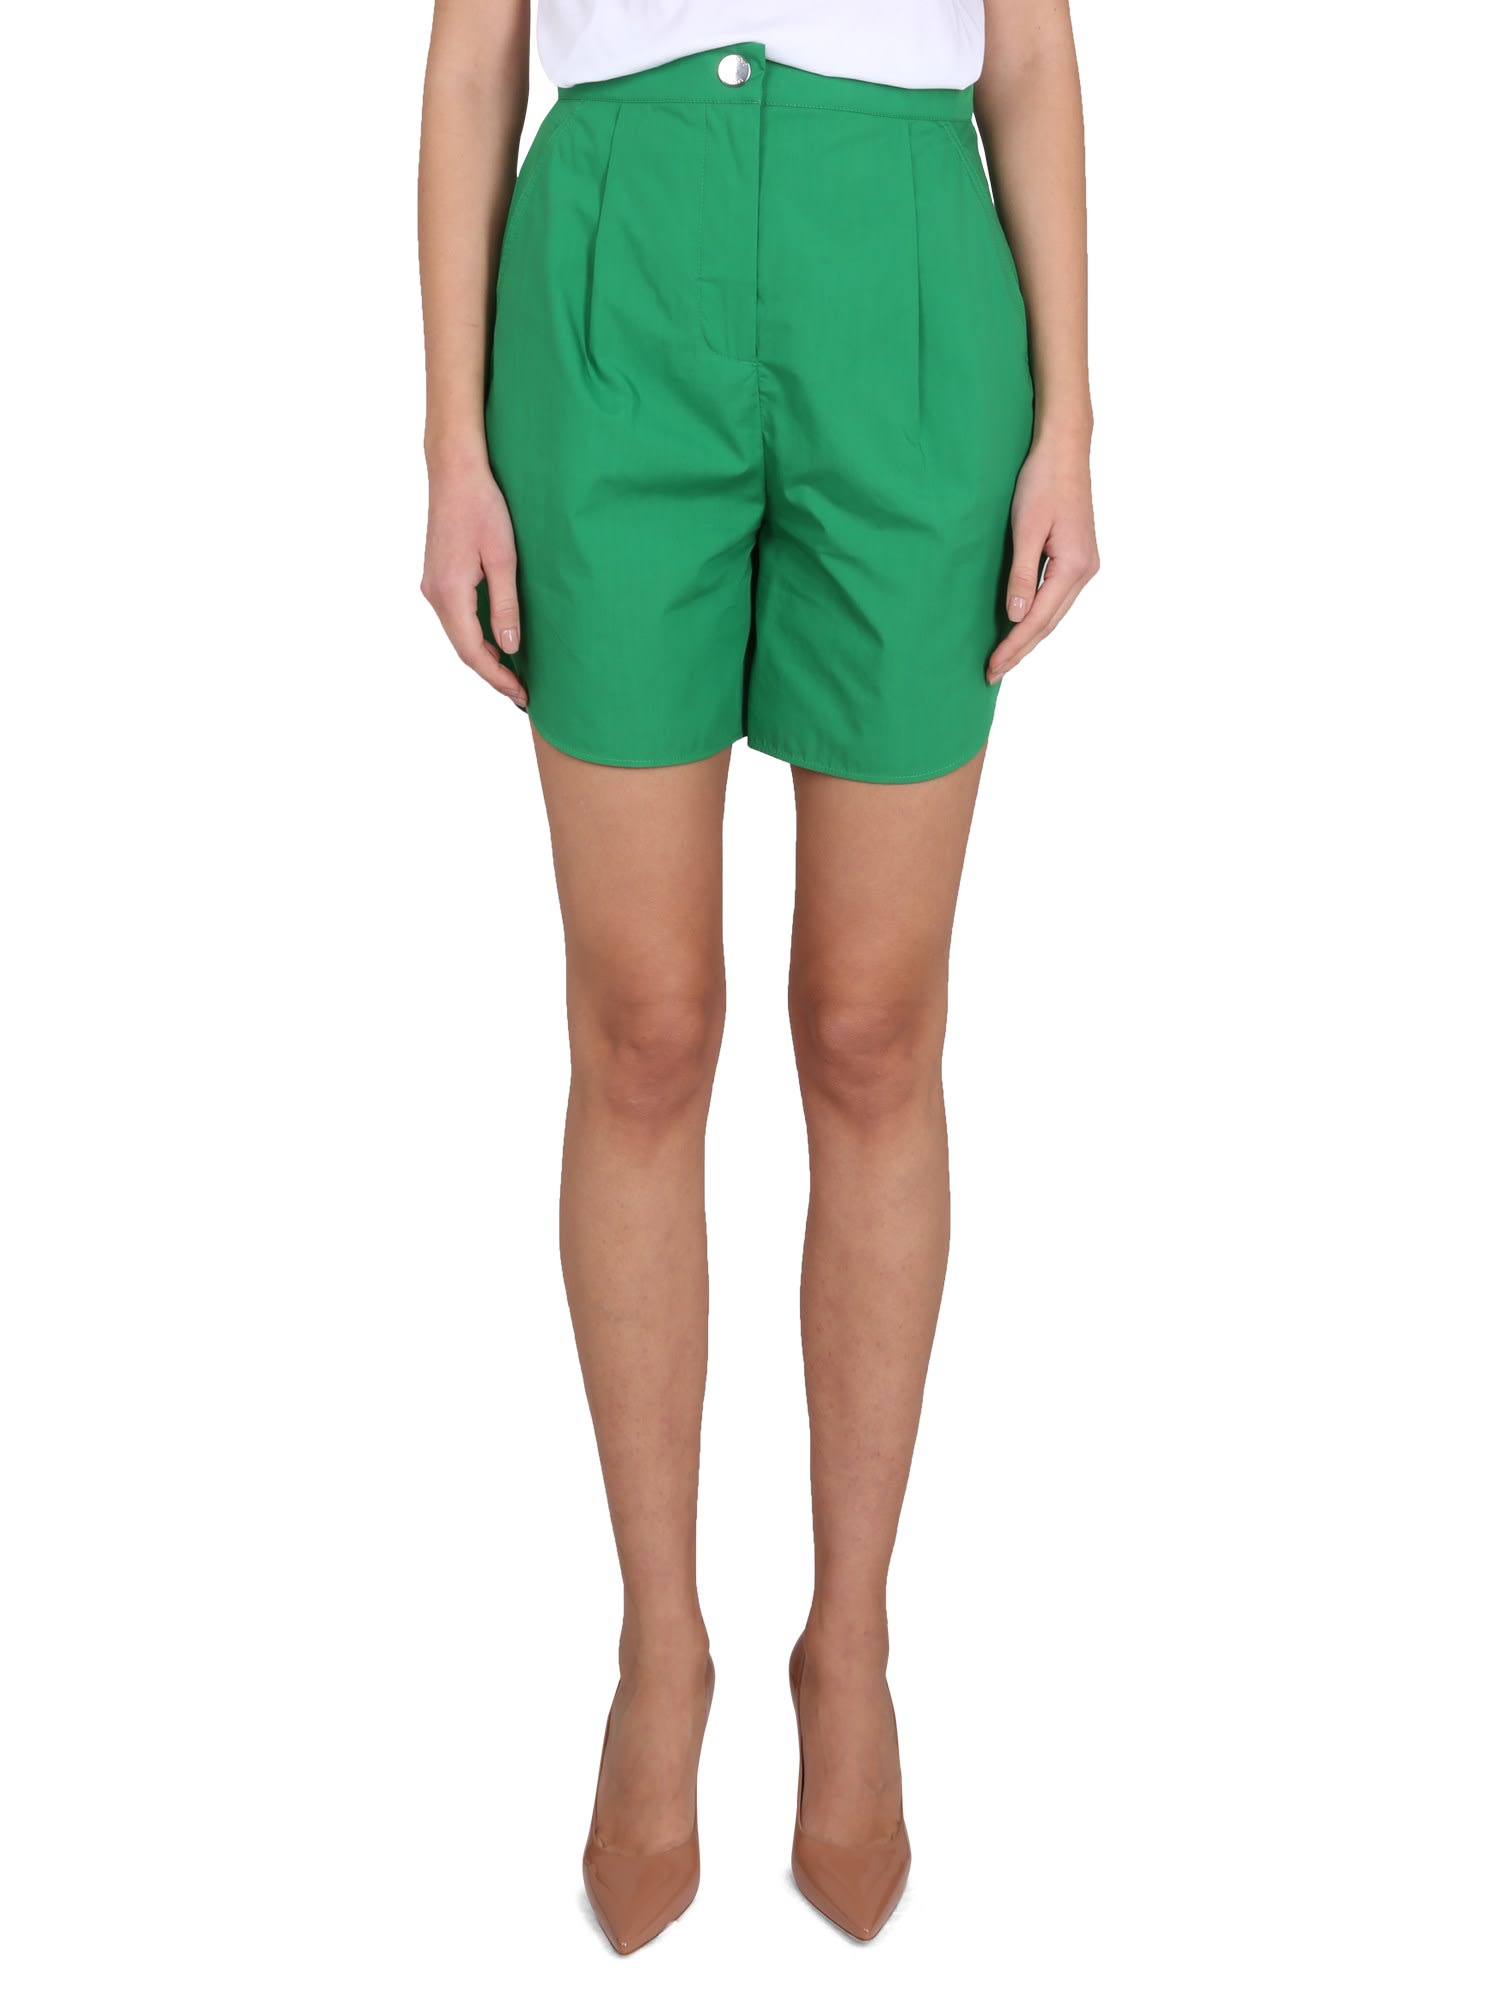 Boutique Moschino Sport Chic Shorts